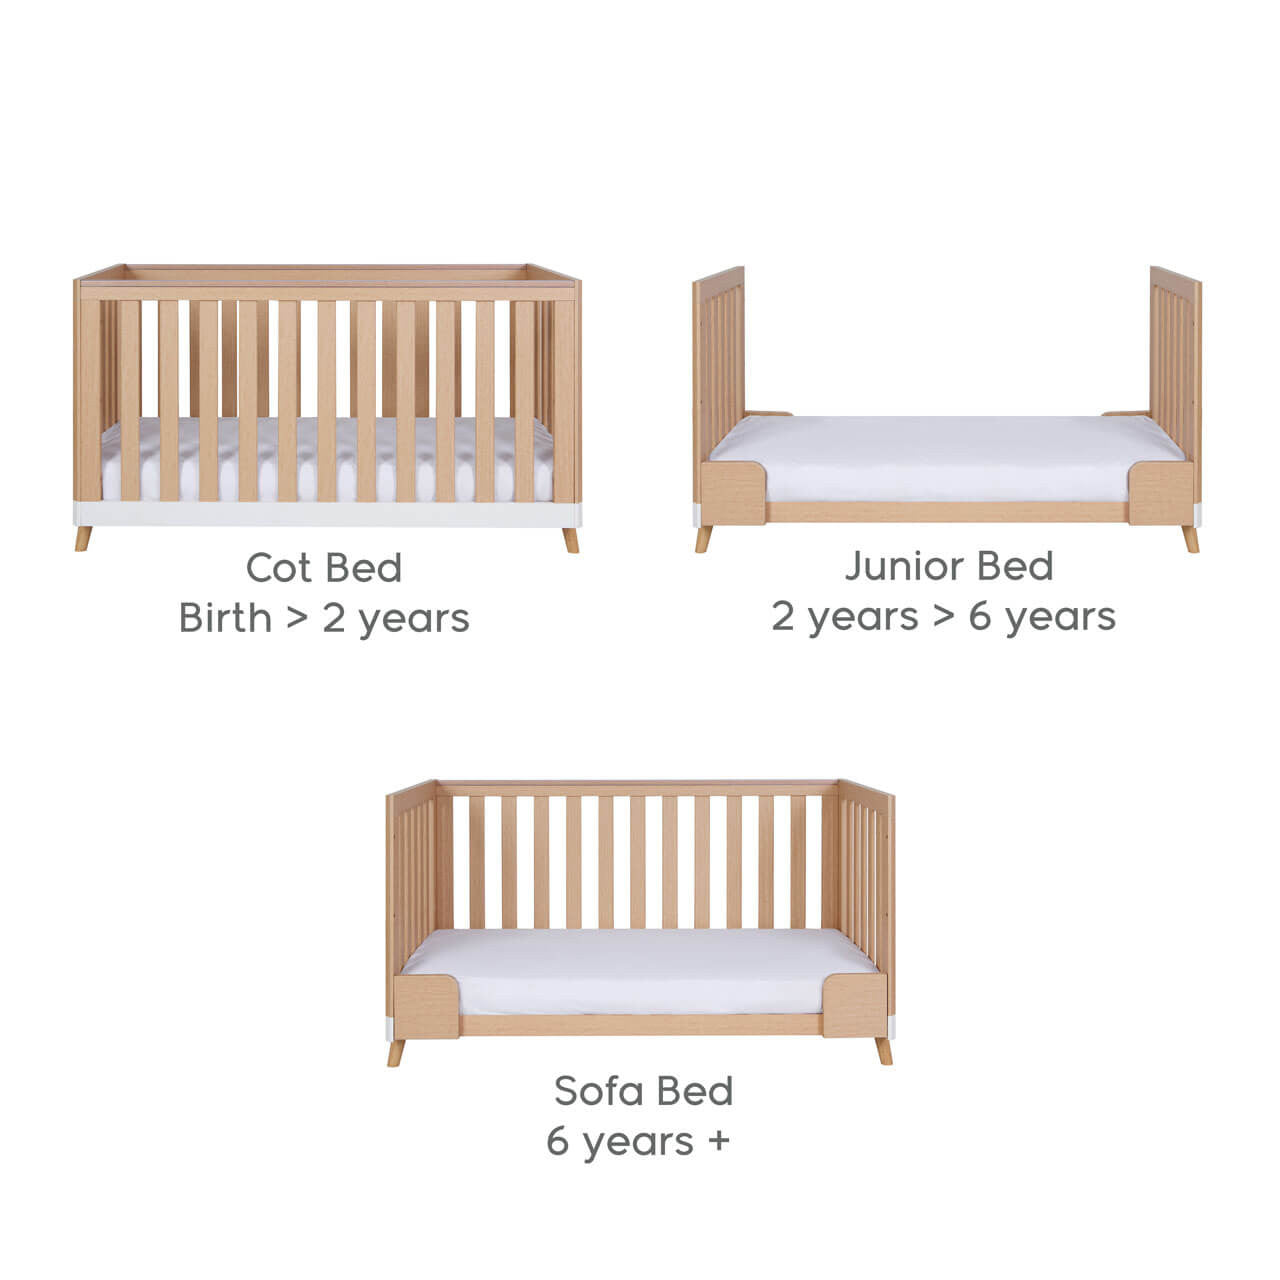 Tutti Bambini Hygge Cot Bed - White/Light Oak - For Your Little One